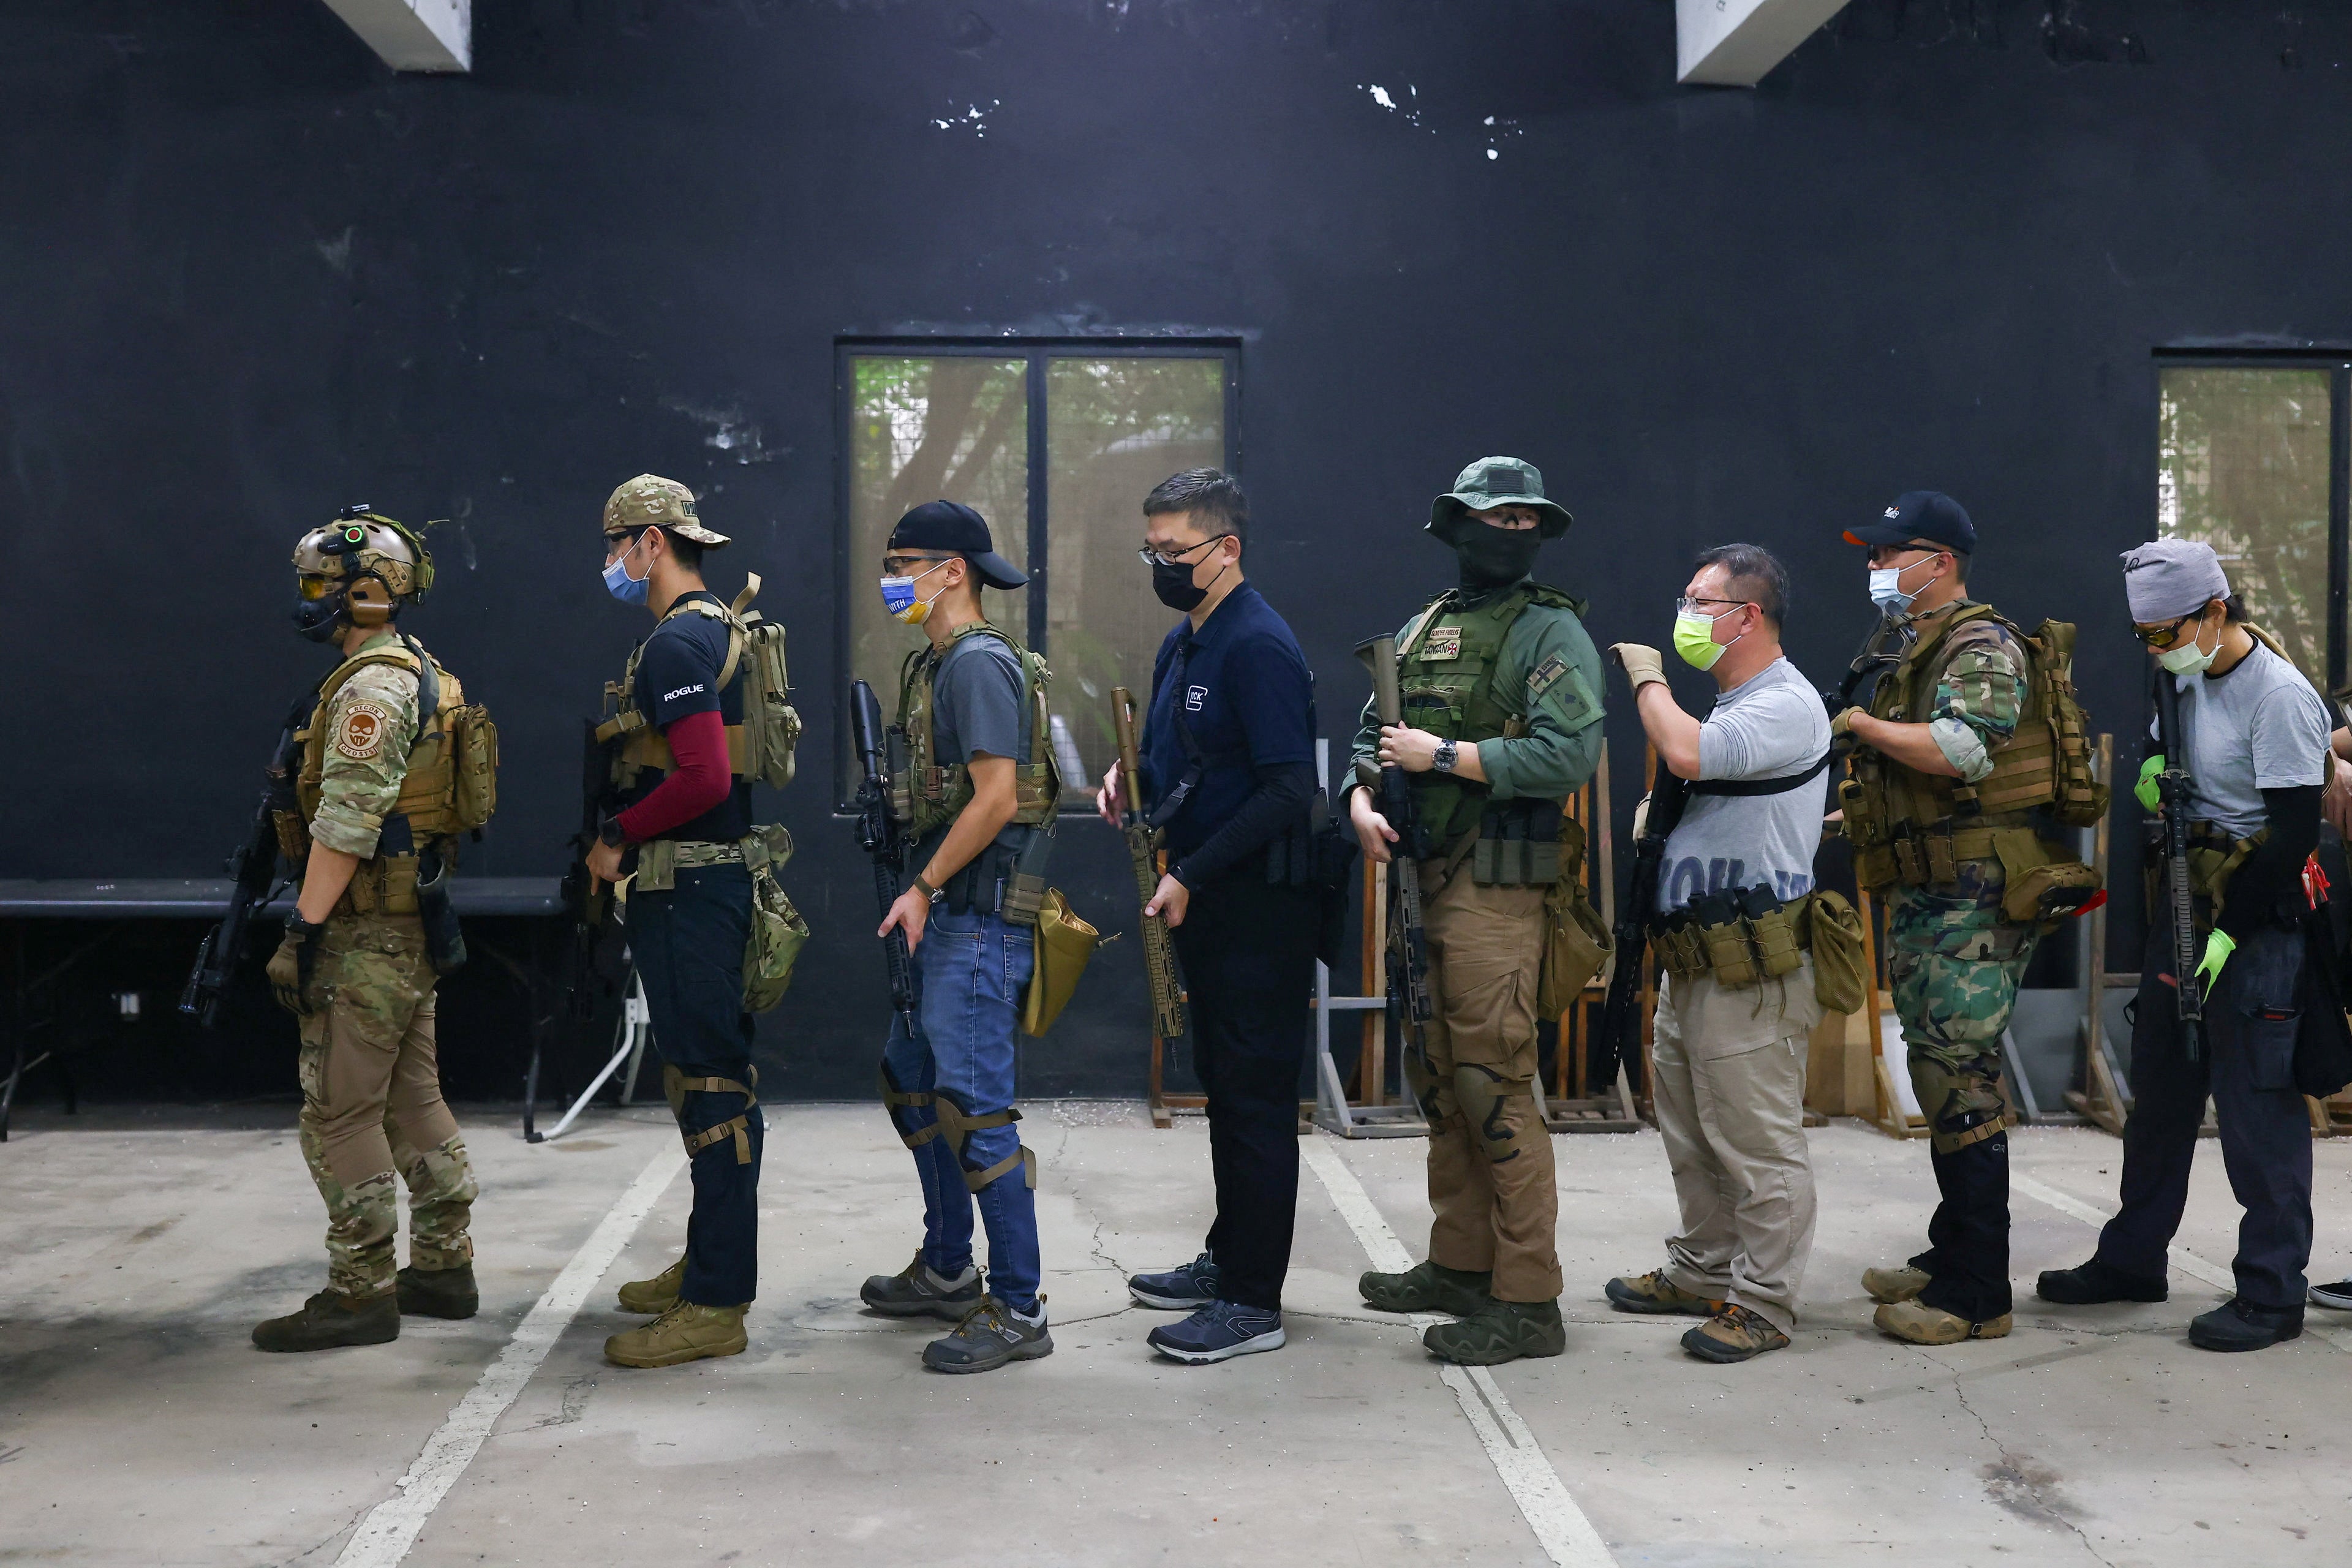 Trainees line up to practise target shooting